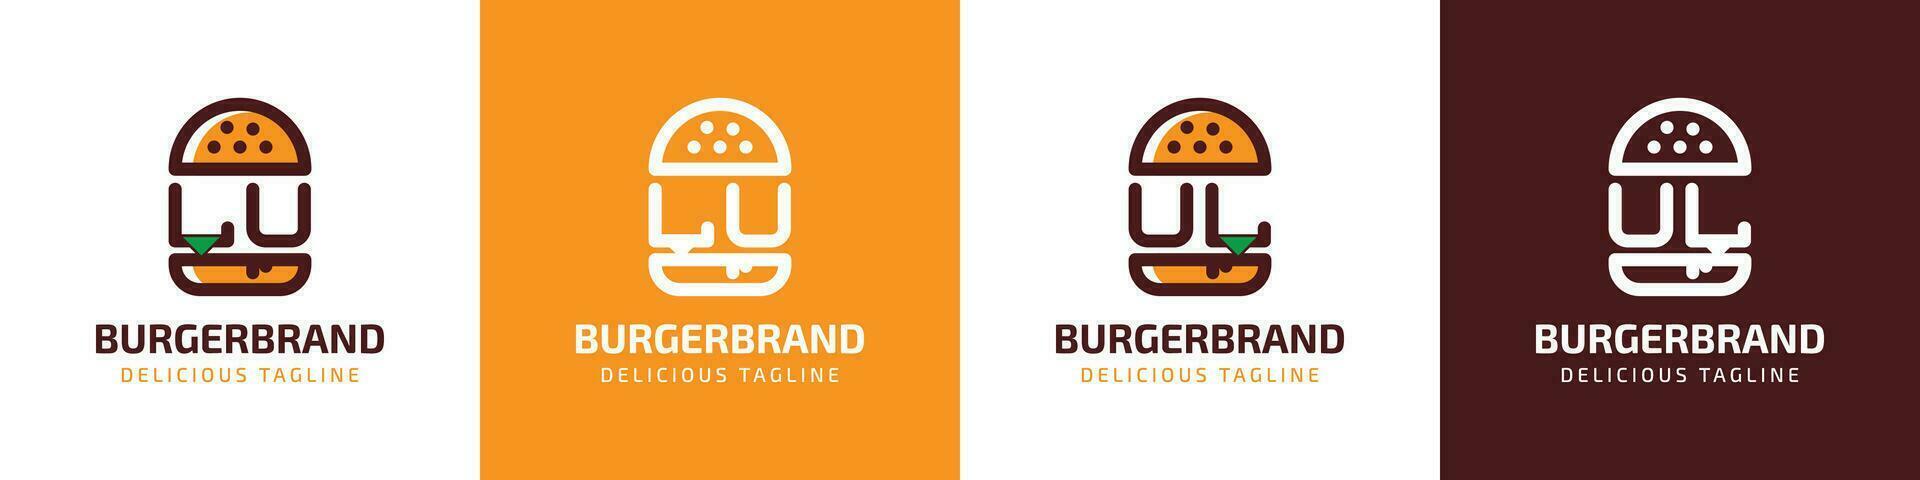 Letter LU and UL Burger Logo, suitable for any business related to burger with LU or UL initials. vector